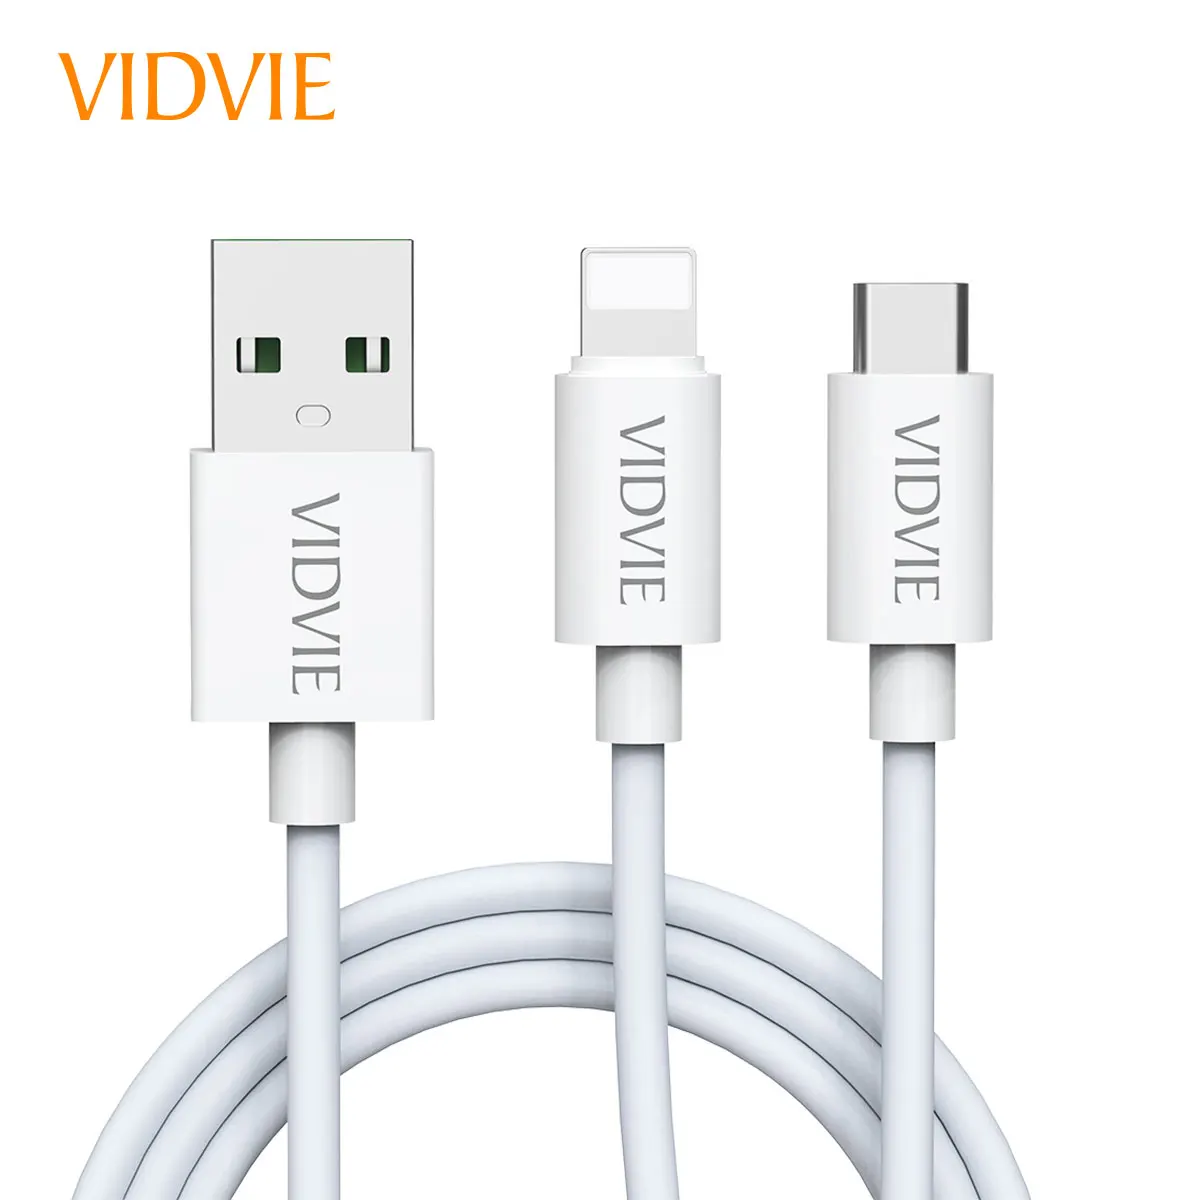 Vidvie 2 In 1 5a High Speed Abs Protector Multi Charging Data Transfer  Cable - Buy 5a Fast Charging,2in1 Multi Charging Data Transfer Cable,White  1.2m Multi Usb Charger Cable Product on Alibaba.com